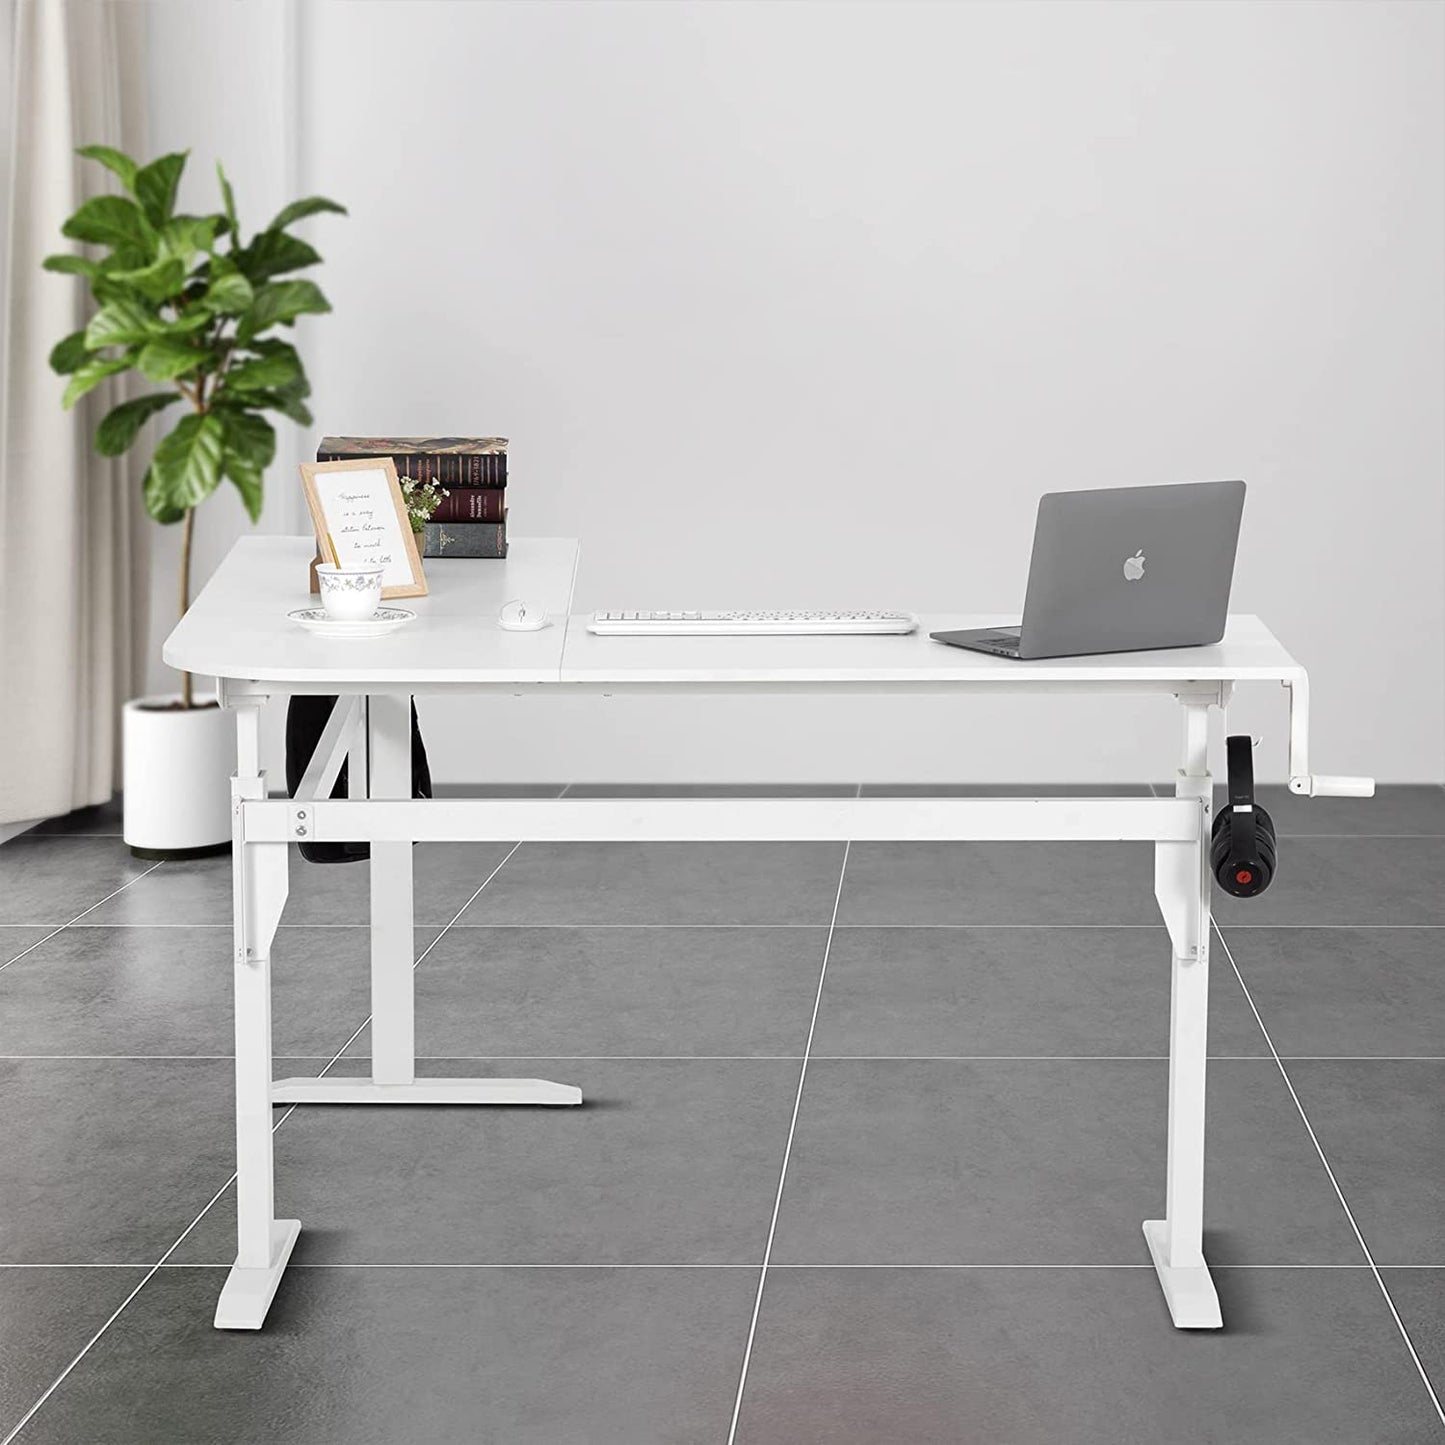 UNICOO – L Shaped Crank Height Adjustable Standing Desk, Sit to Stand up Corner Desk, L-Shaped Standing Workstation (XJH-LC-White-2 Packages)